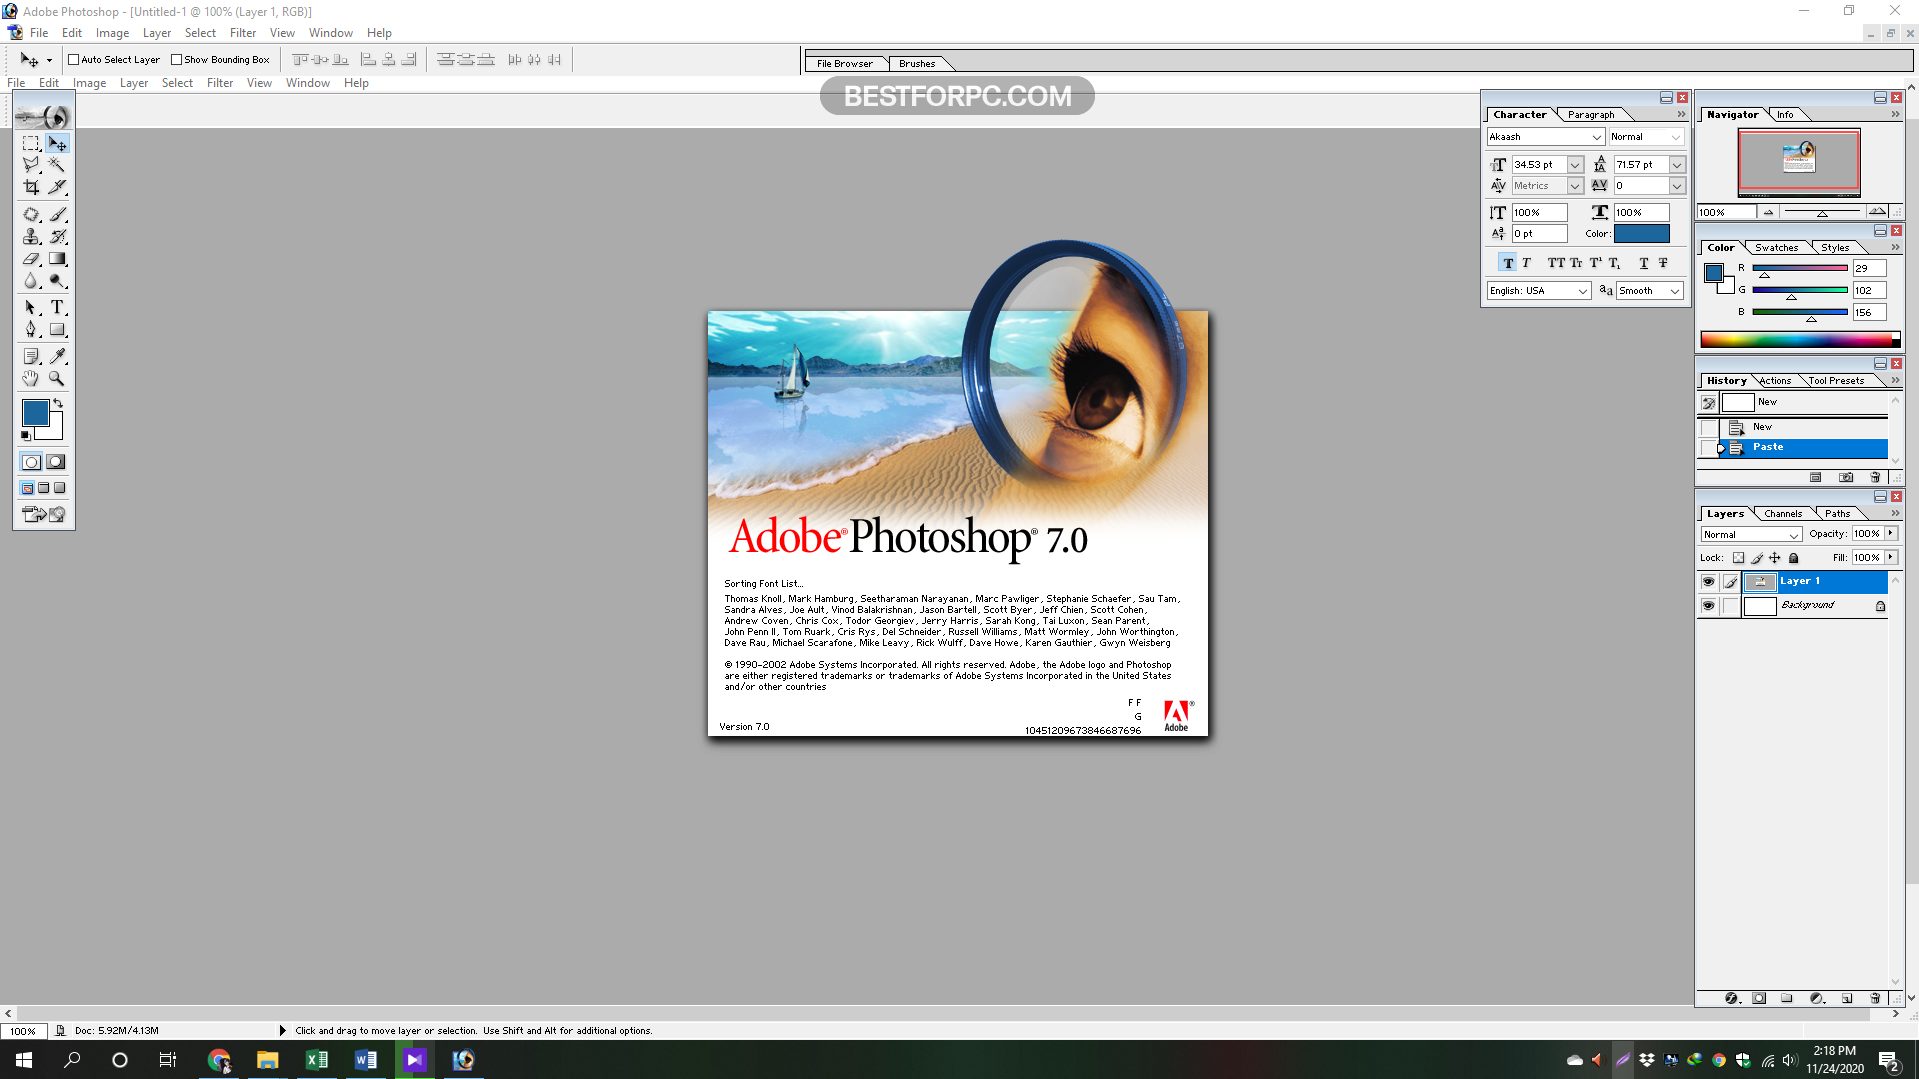 adobe photoshop 7.0 free download for windows 8